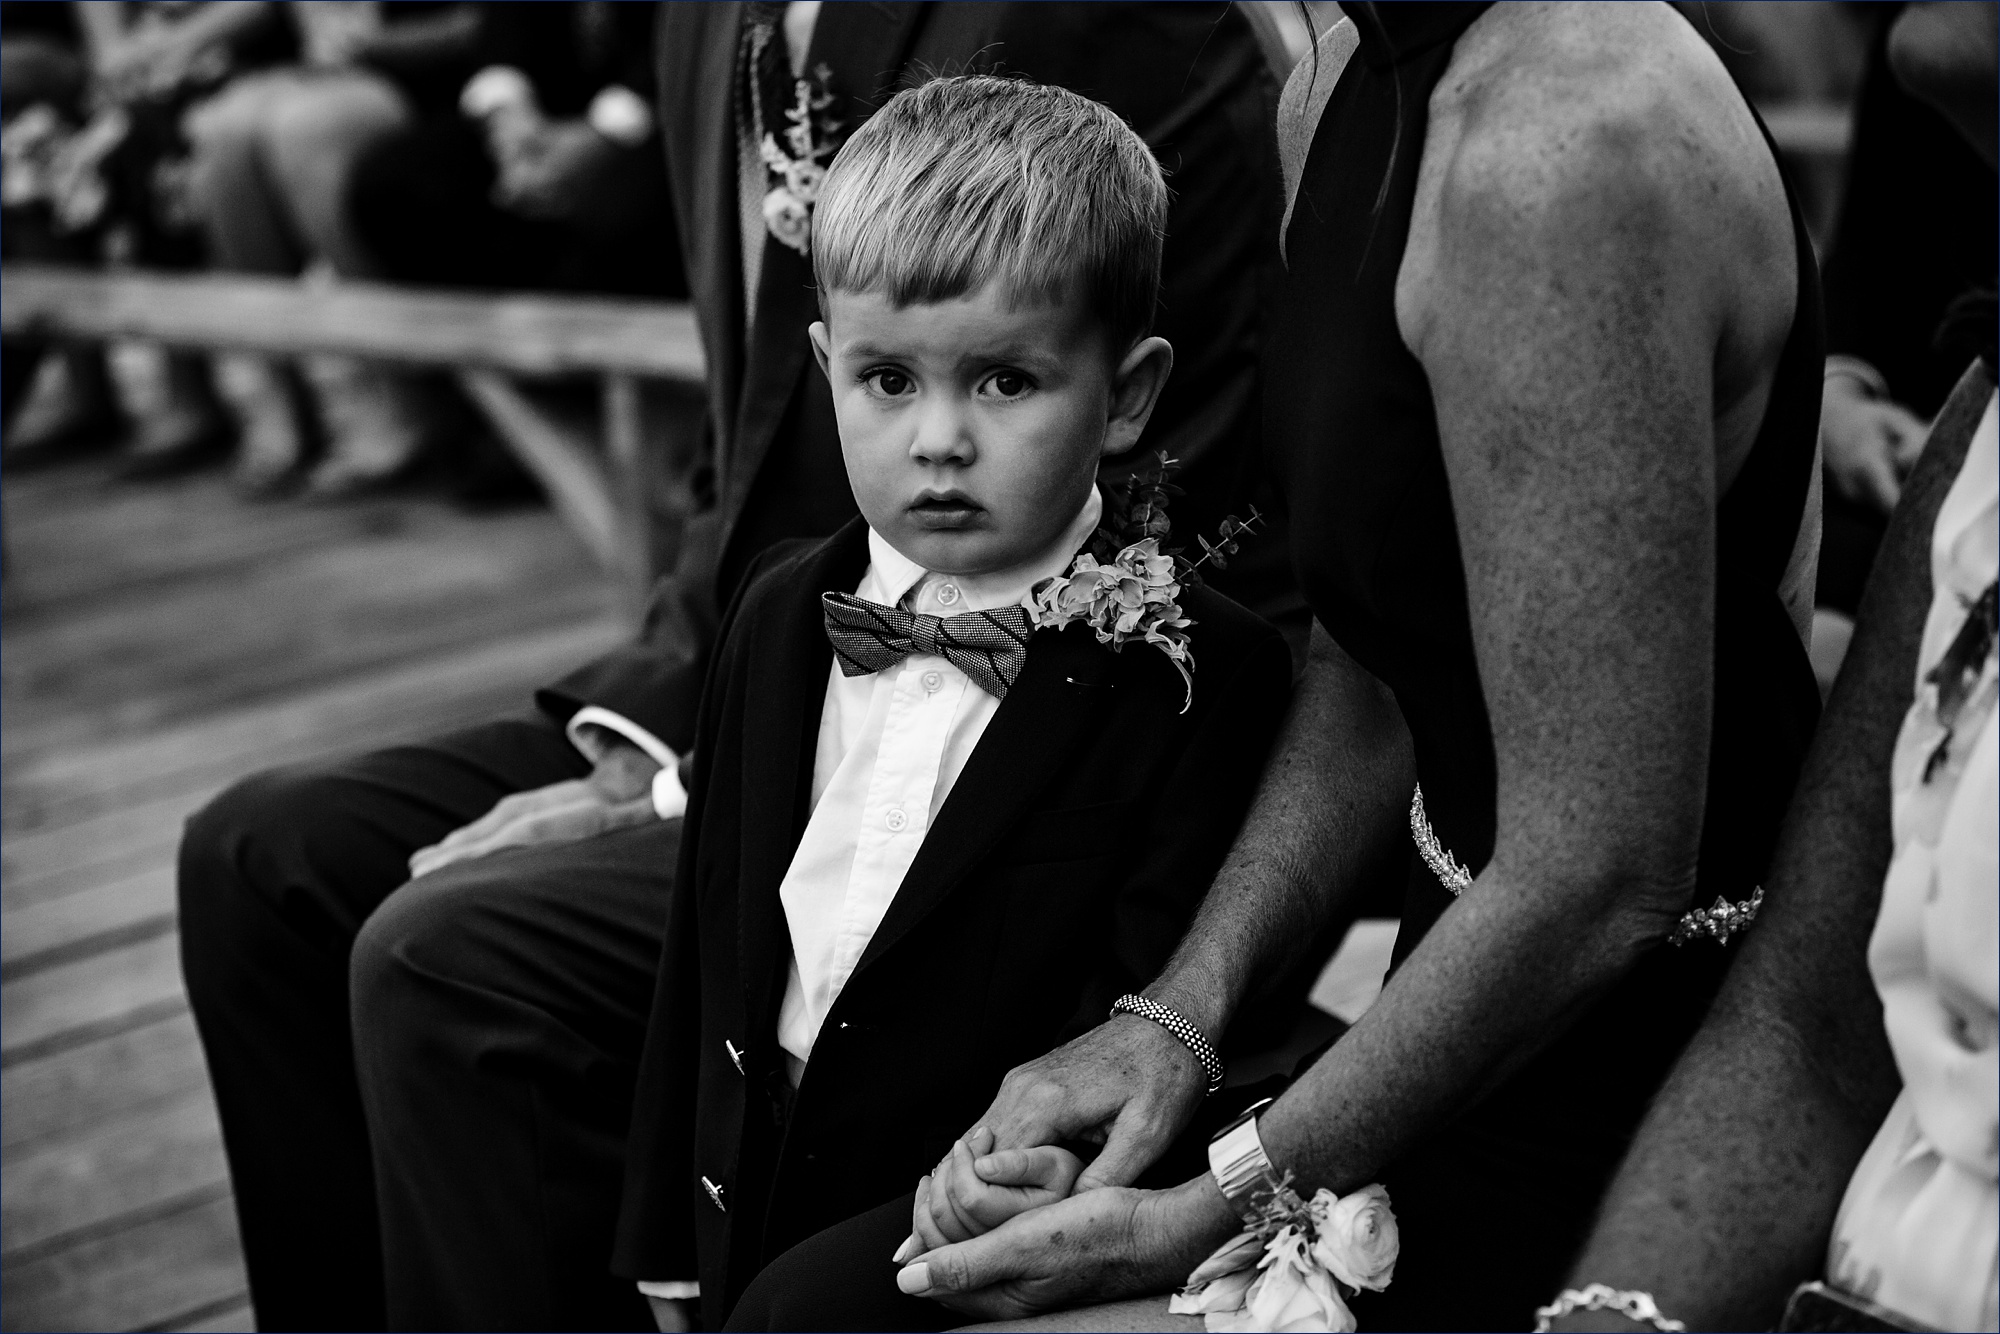 The son of the couple watches the action of the wedding ceremony with his grandmother